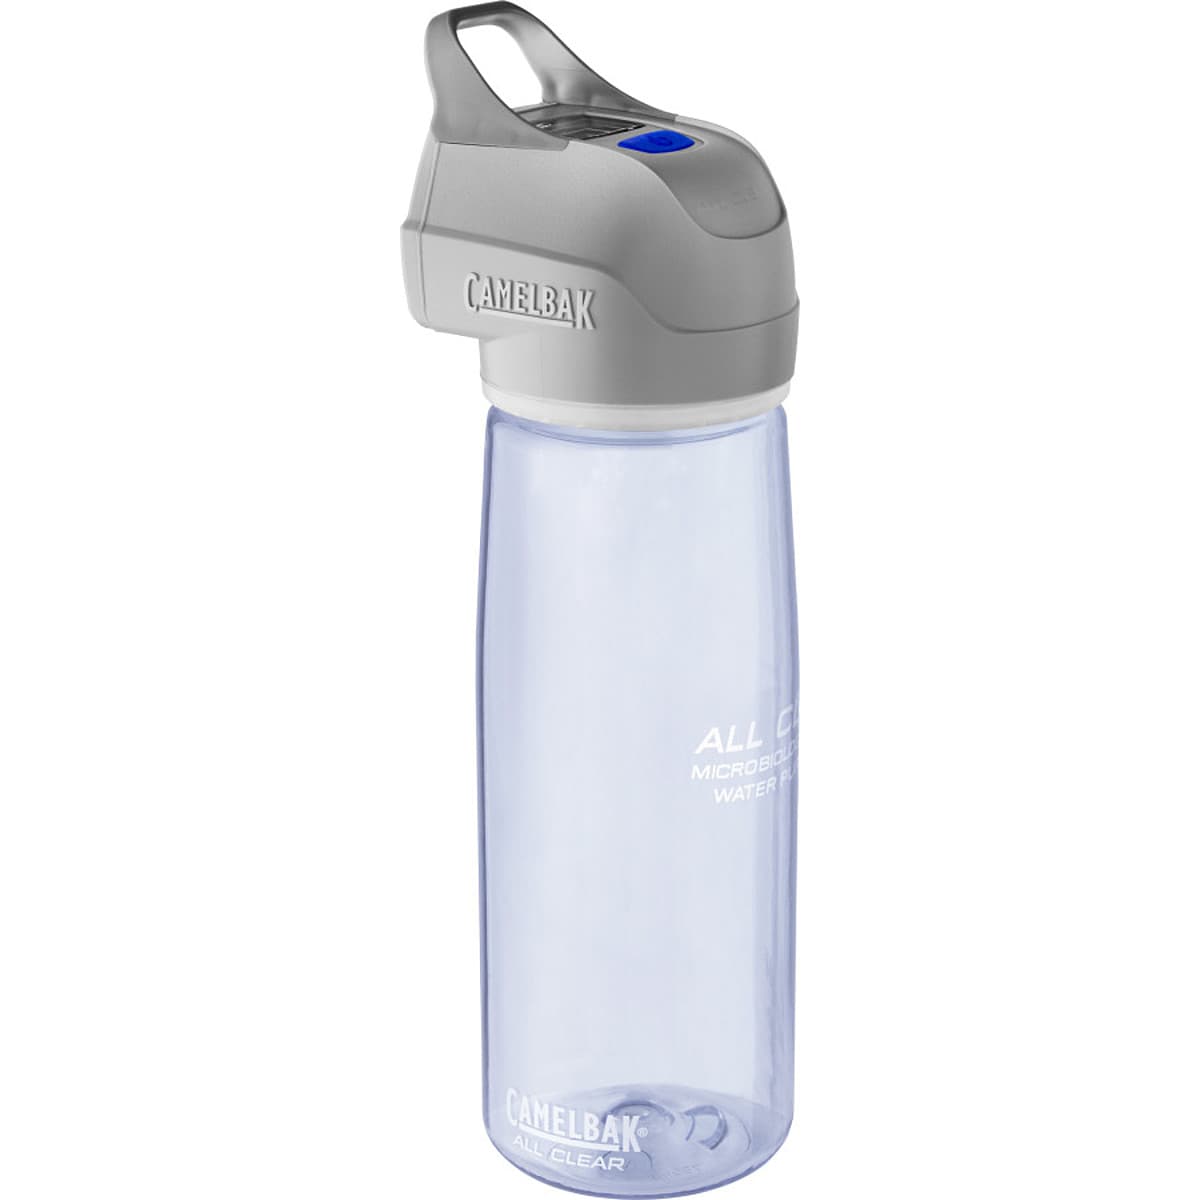 CamelBak All Clear Microbiological UV Water Purifier 75L